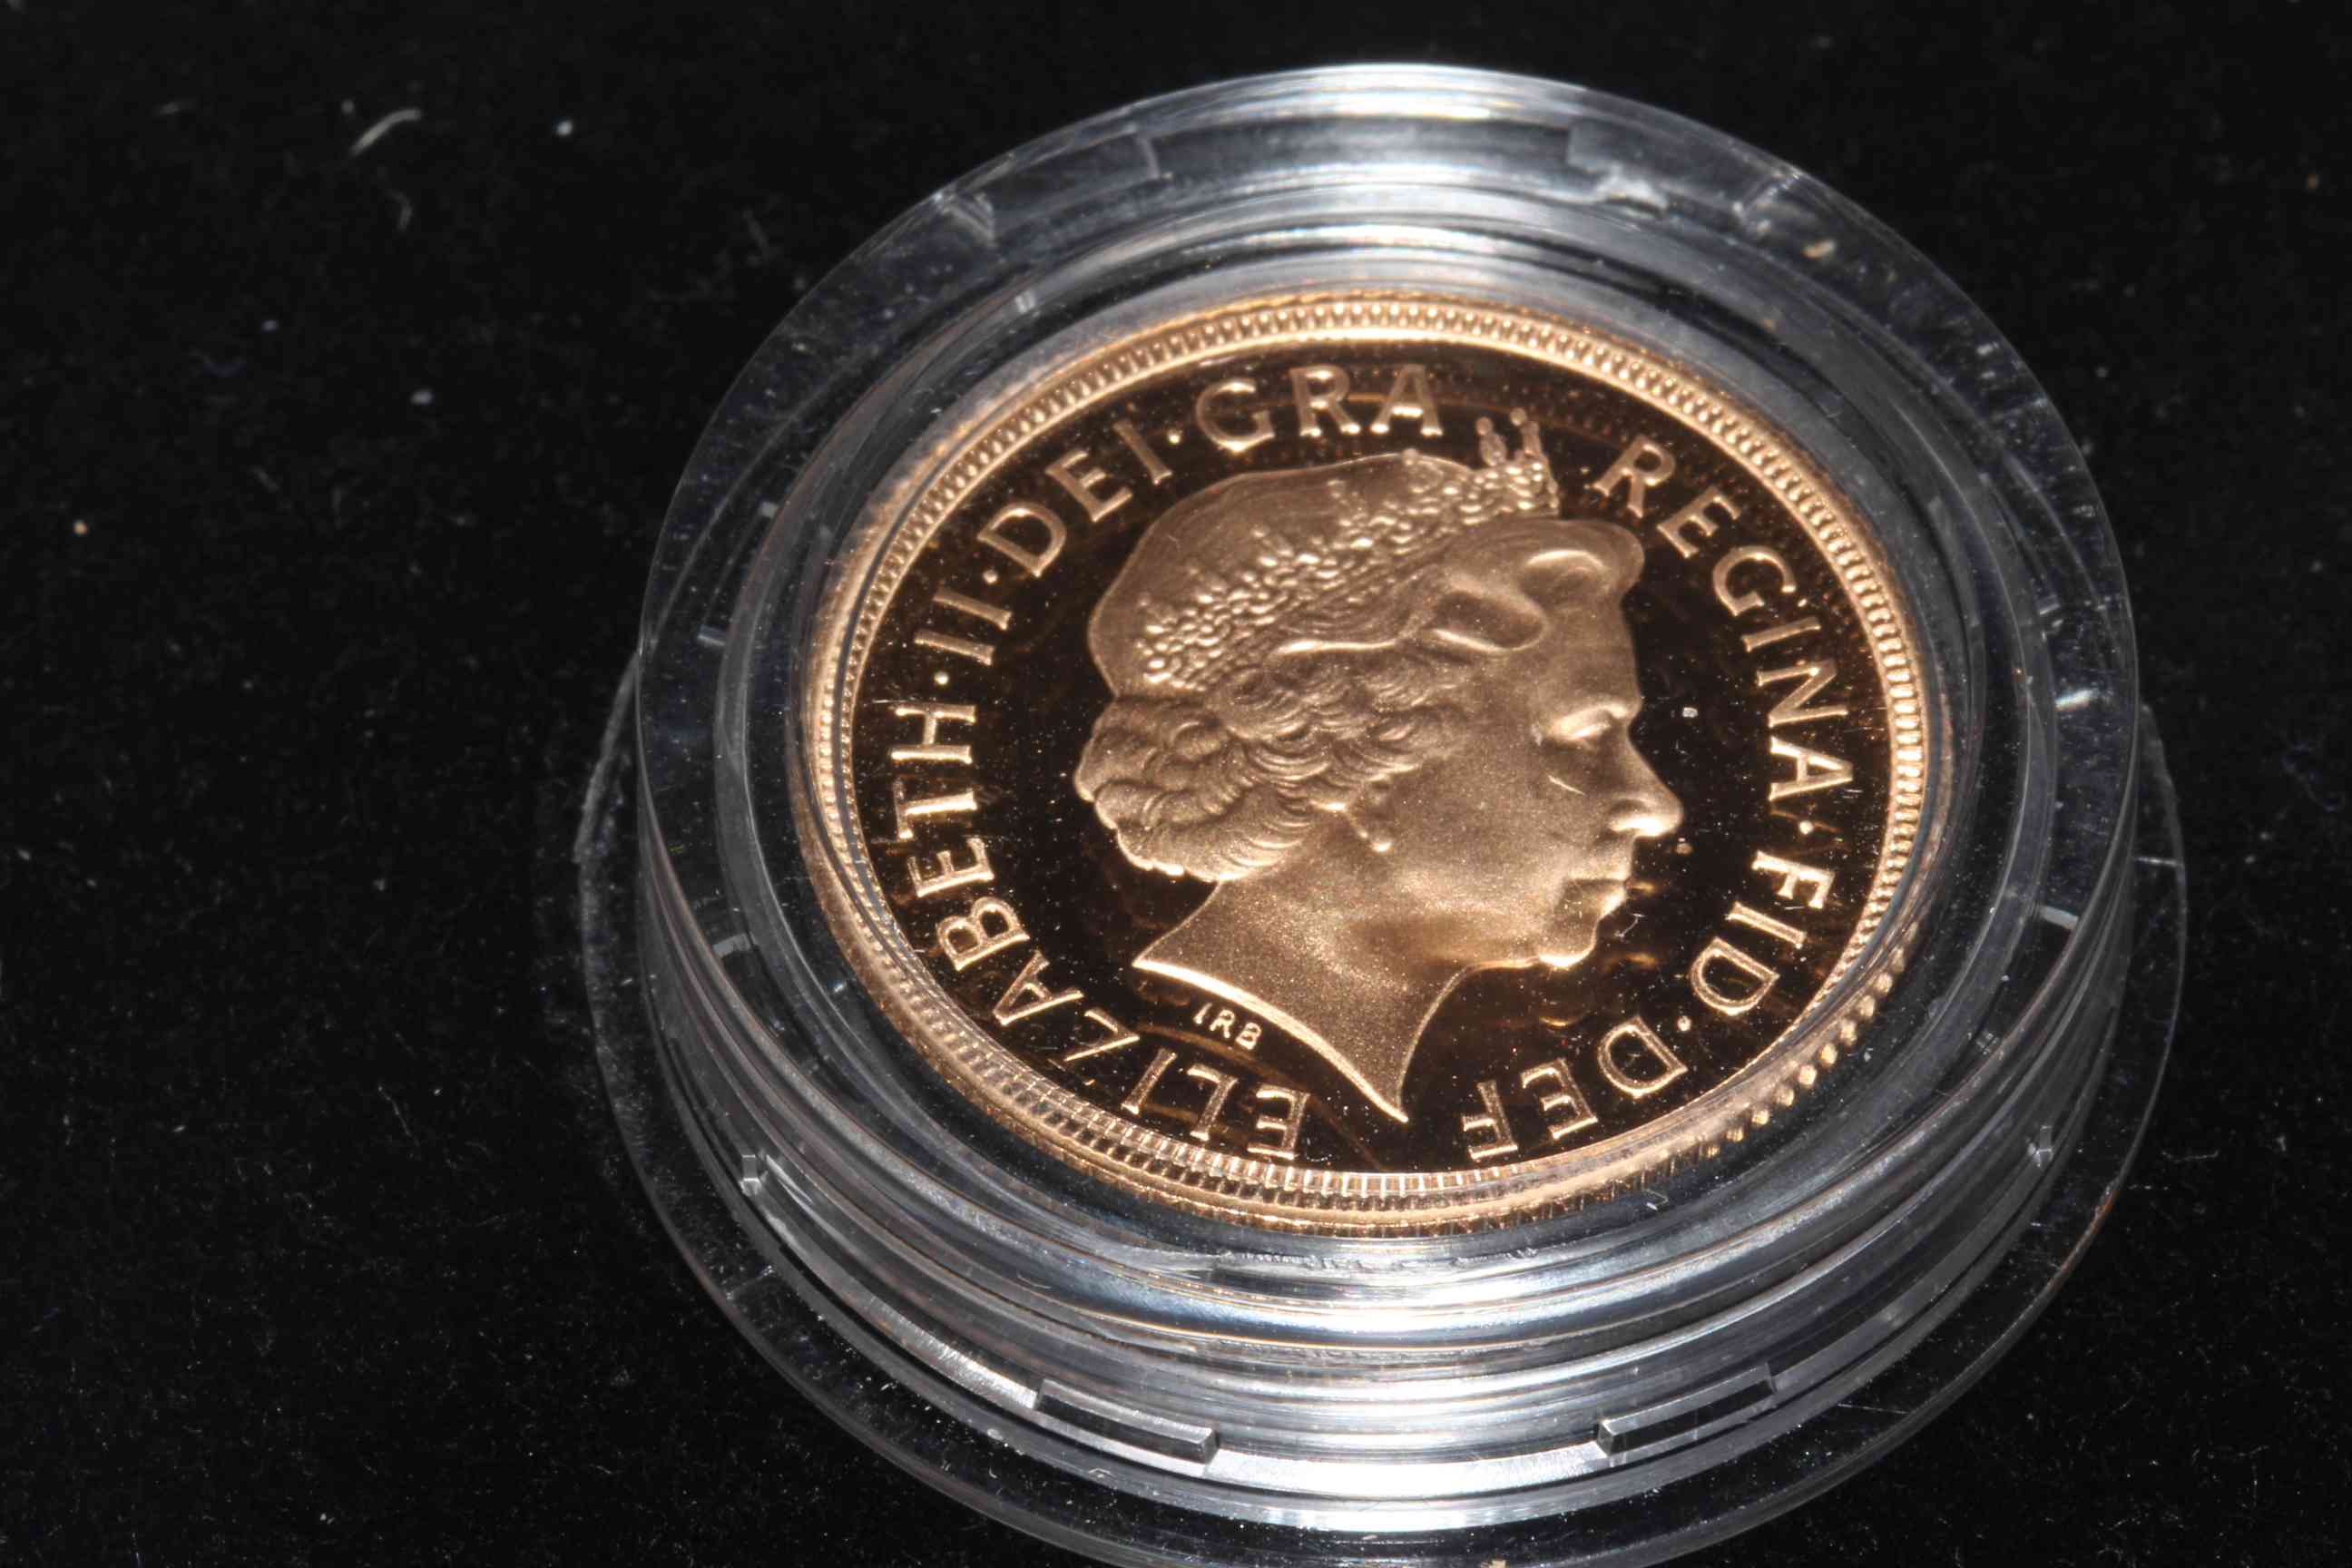 1999 gold proof sovereign, with certificate and numbered 8708. - Image 2 of 2